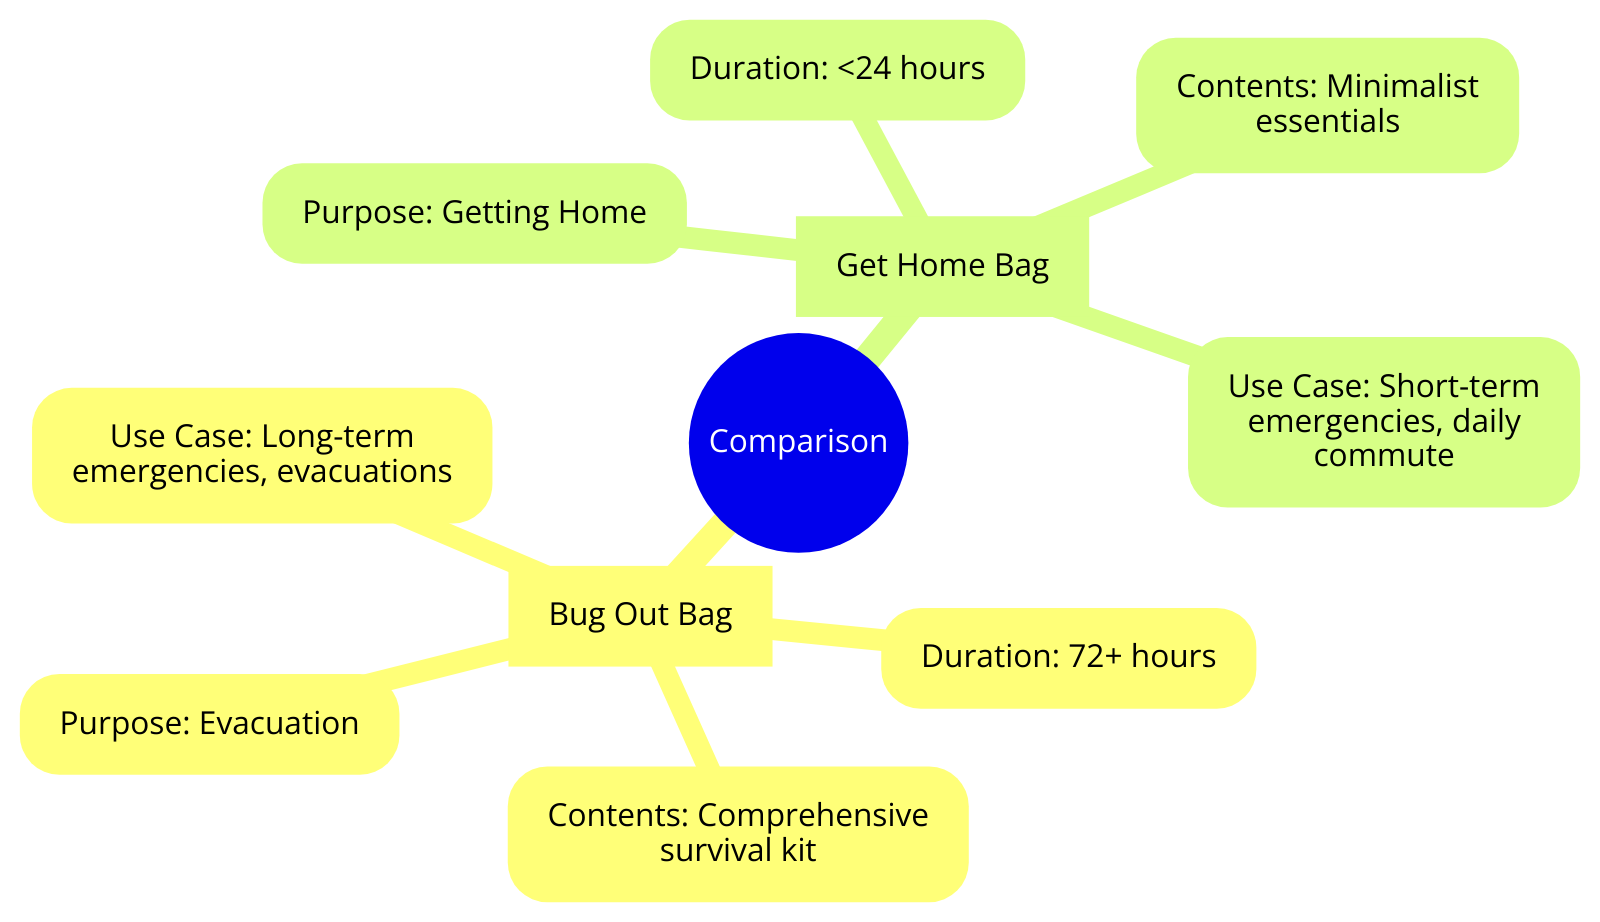 the comparison between "Bug Out Bag" and "Get Home Bag"